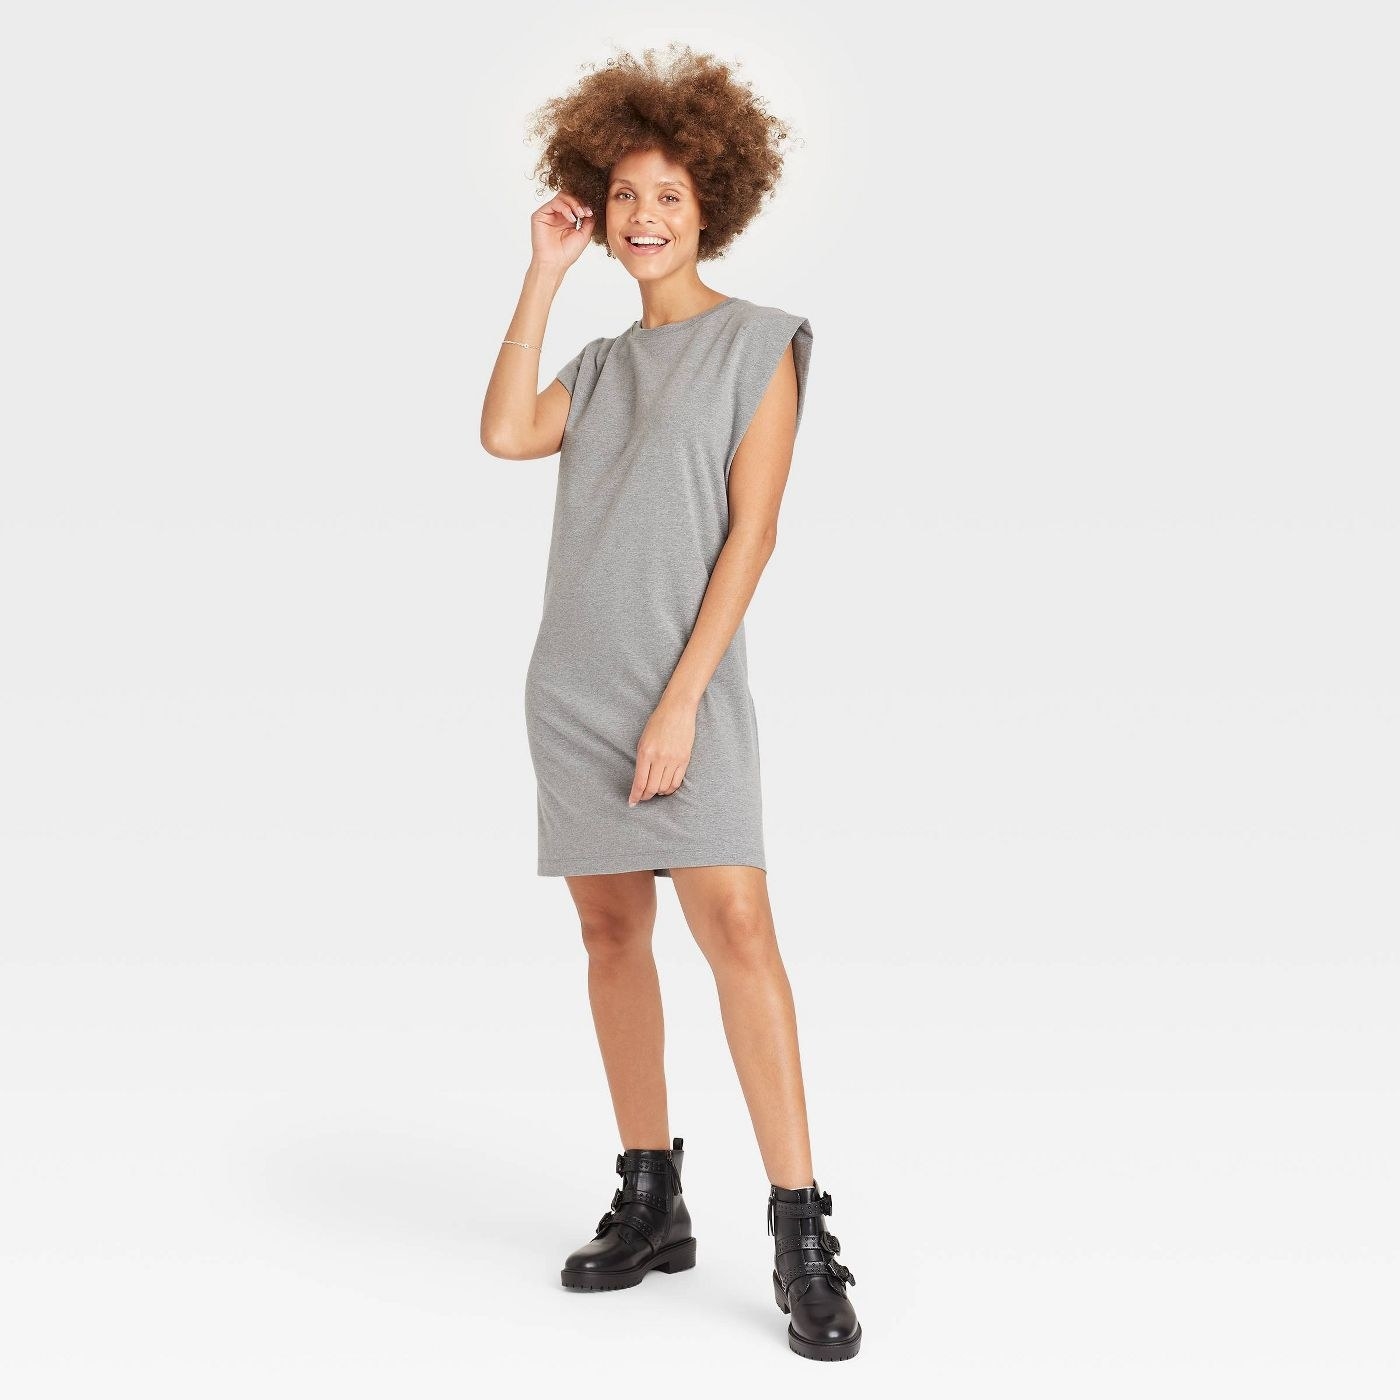 front view of model wearing the dress in gray